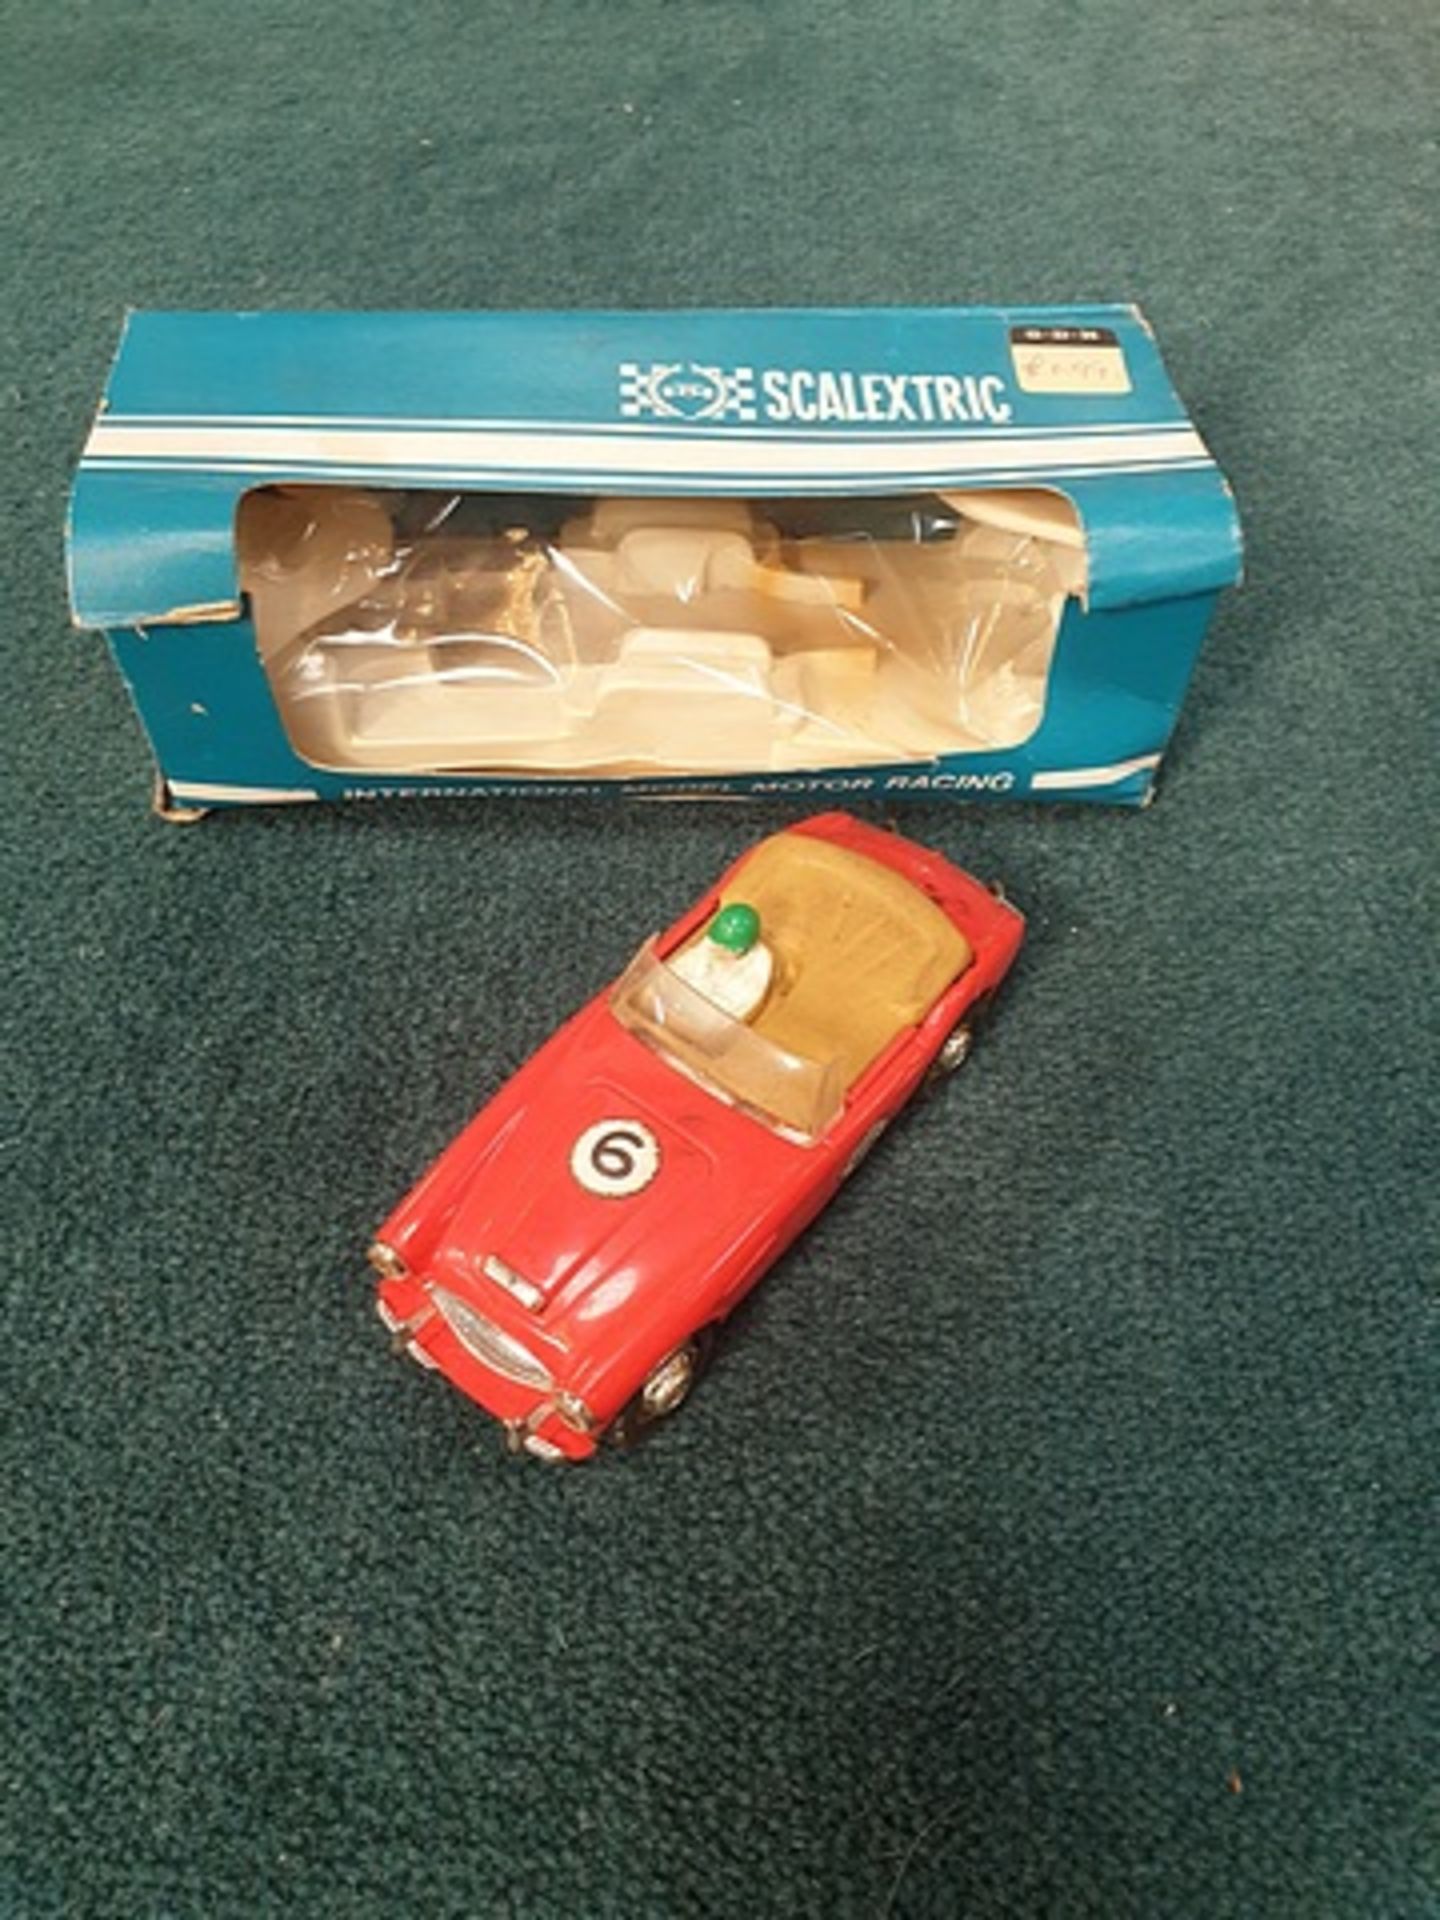 Scalextric International Model Motor Racing Car Austin Healey In Red Complete In Box (Box Is